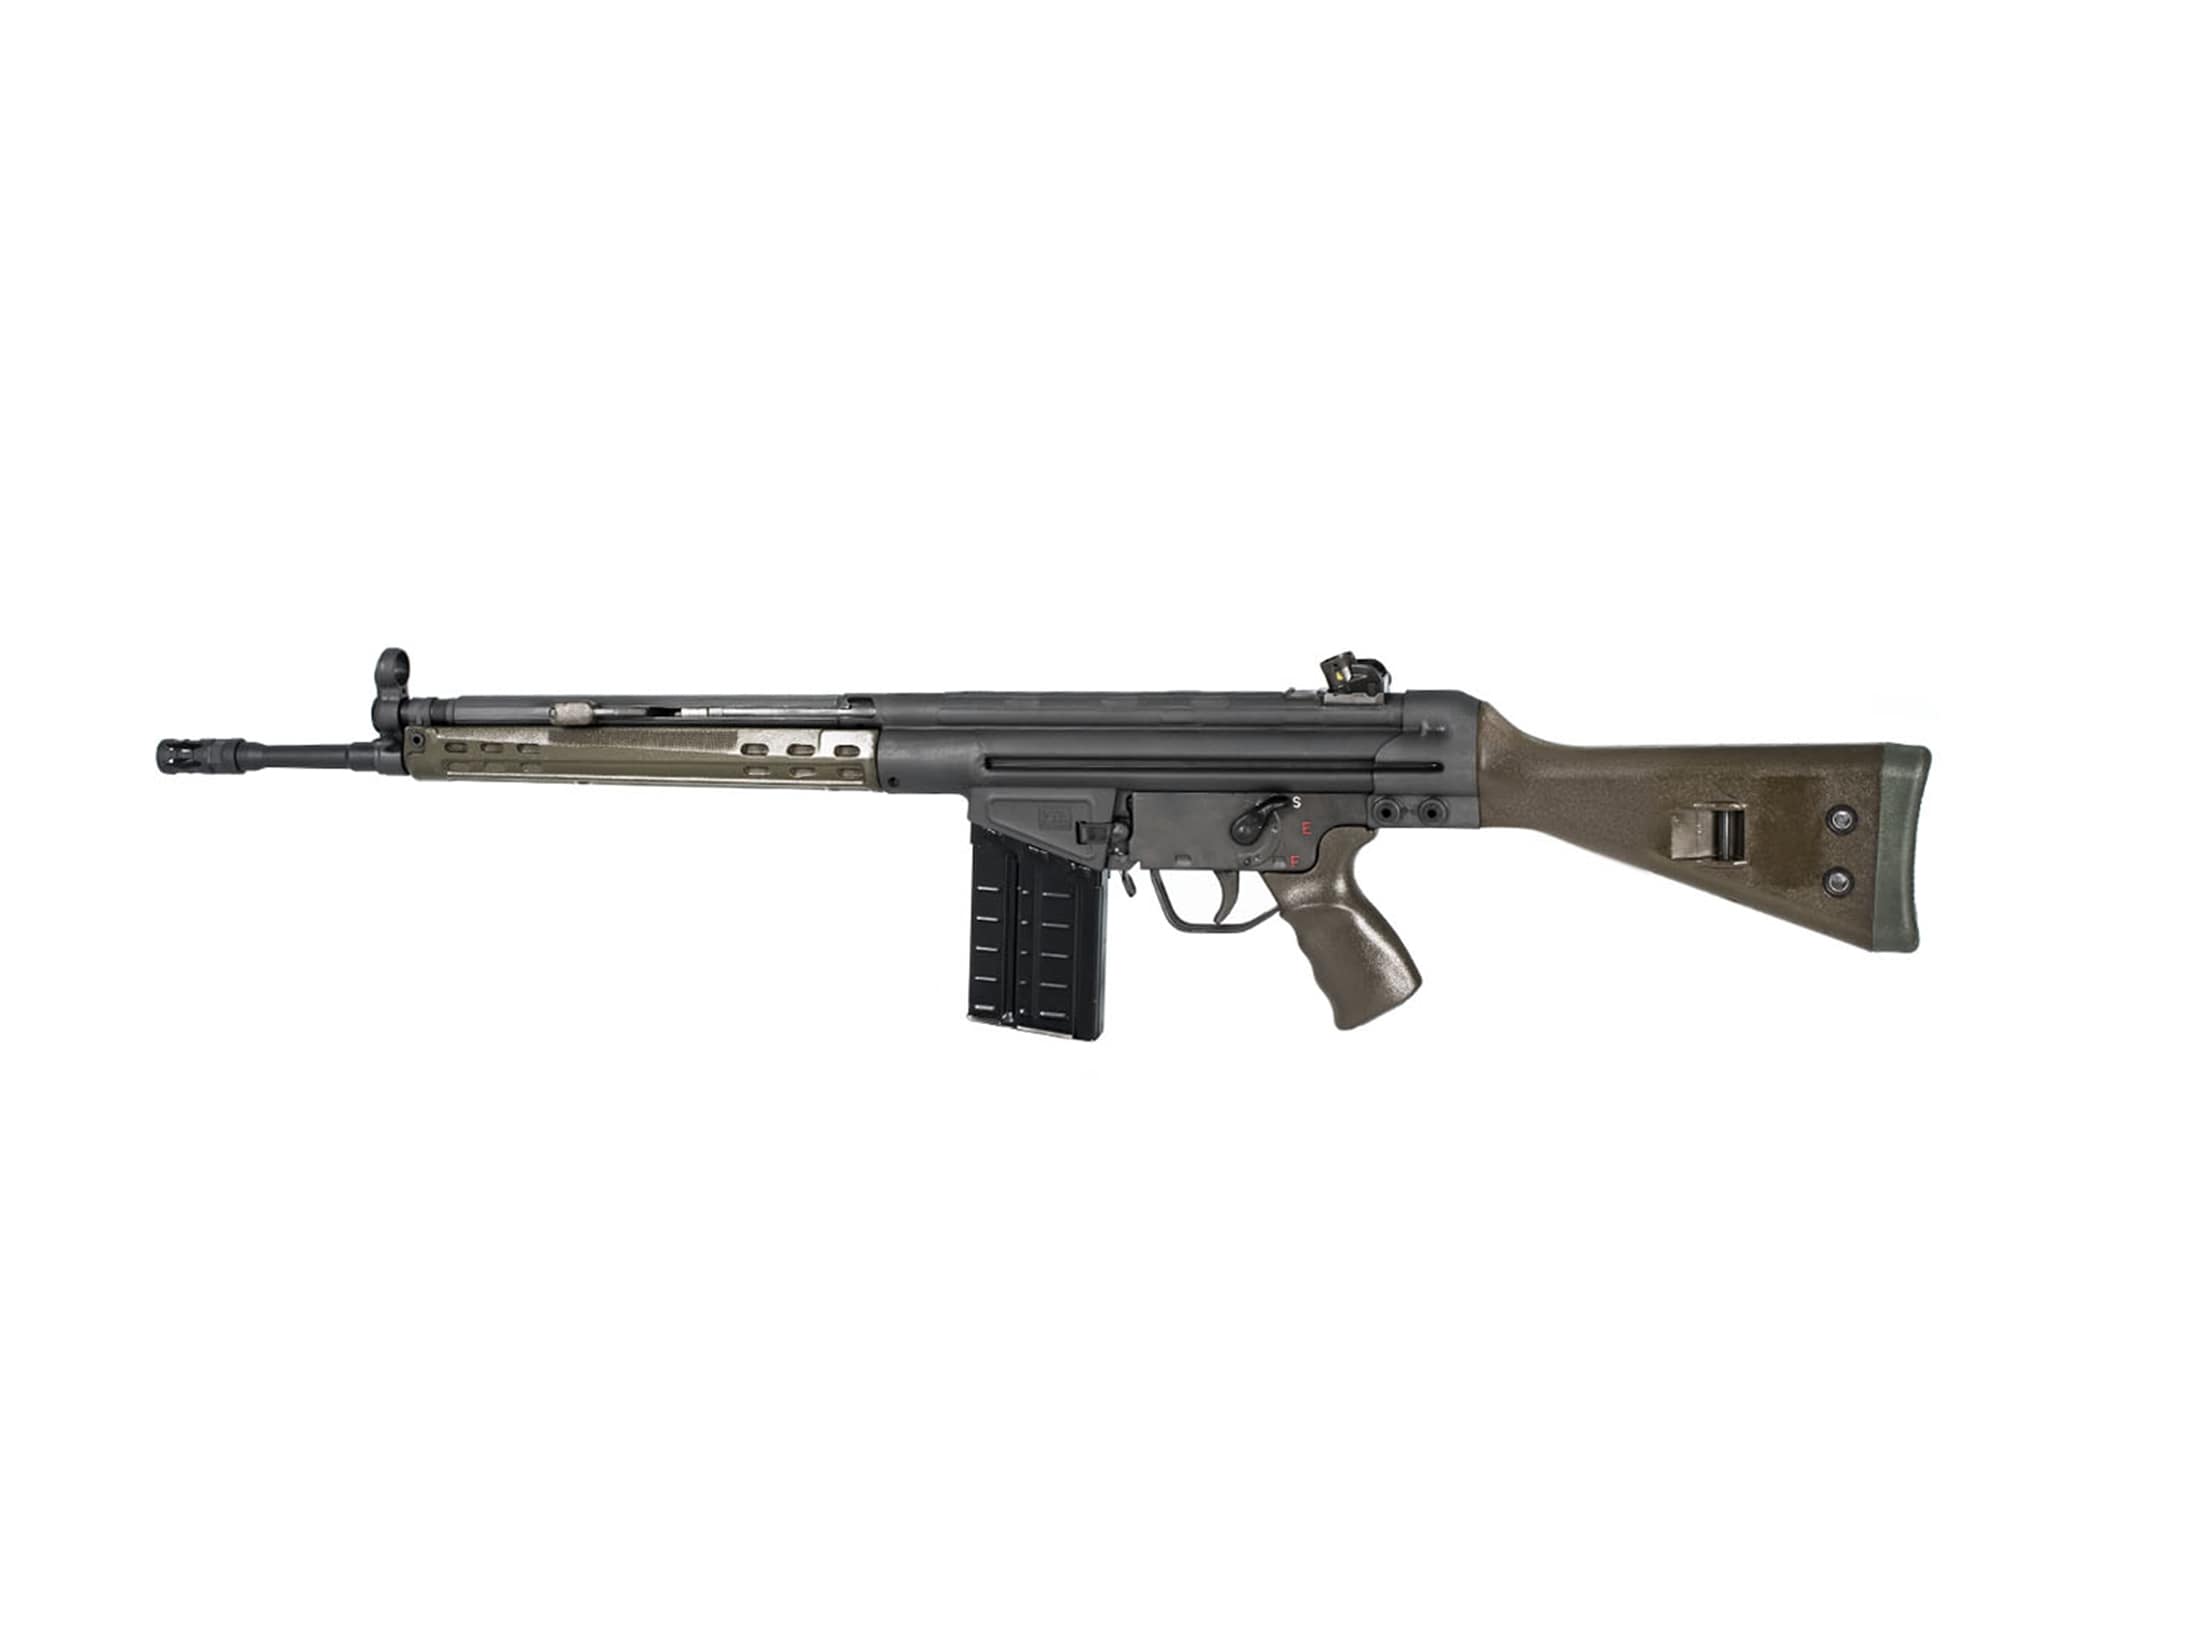 Image of PTR PTR-91GI Semi-Automatic Rifle 308 Winchester 18" Barrel with Claw Mount 20-Round Parkerized Olive Drab